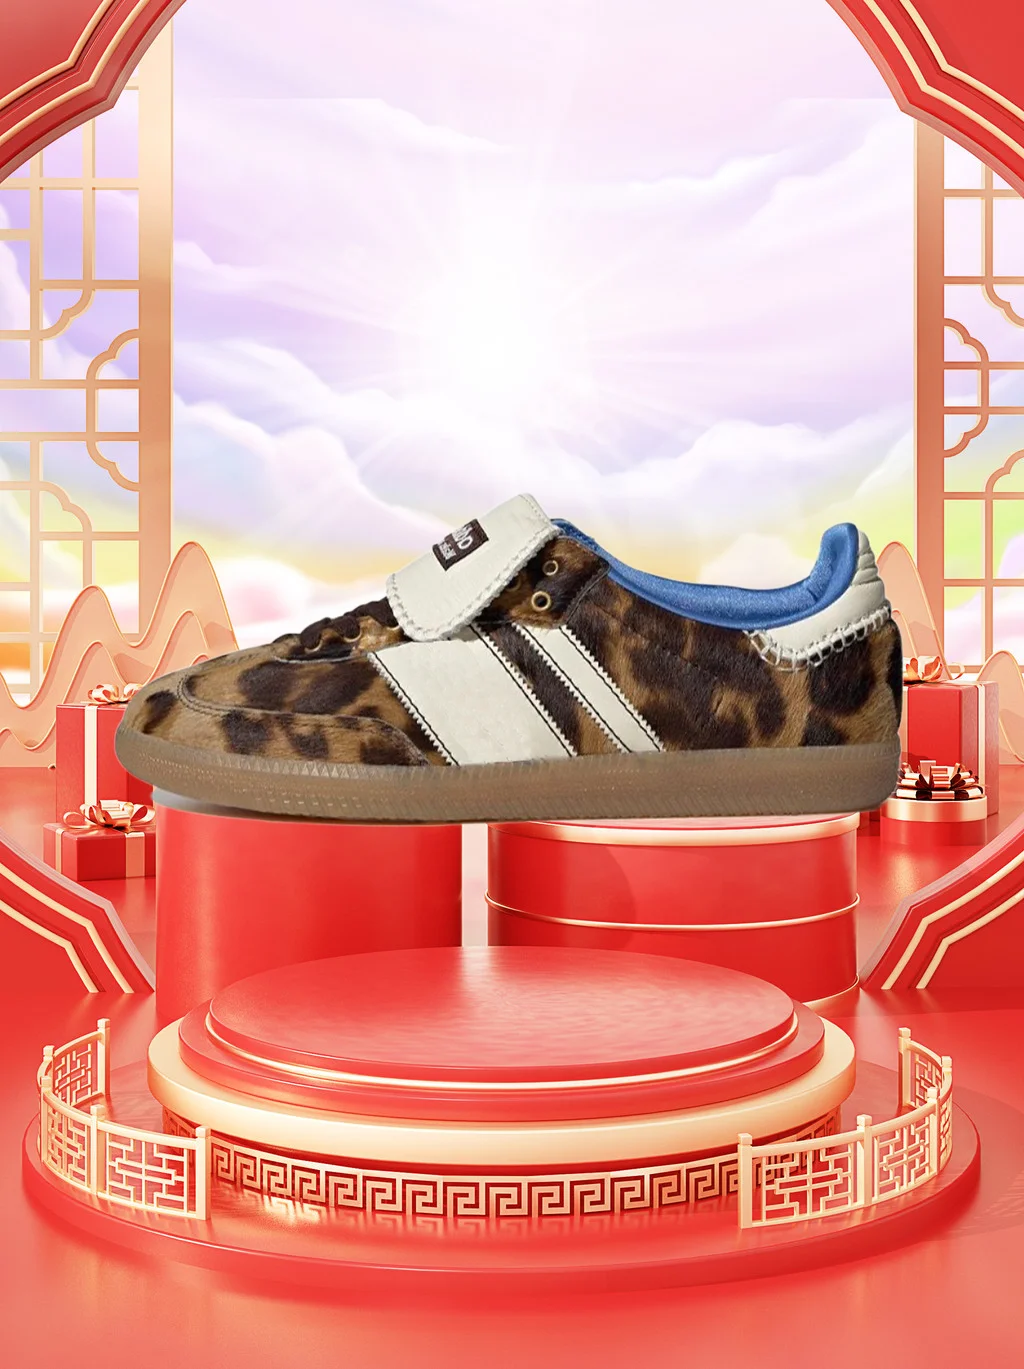 

High Quality Designer Wales Bonner Gazelle Shoes Women Mens Pony Leopard Trainers Vegan Sporty Rich Pink Loafers Sambas Sneakers